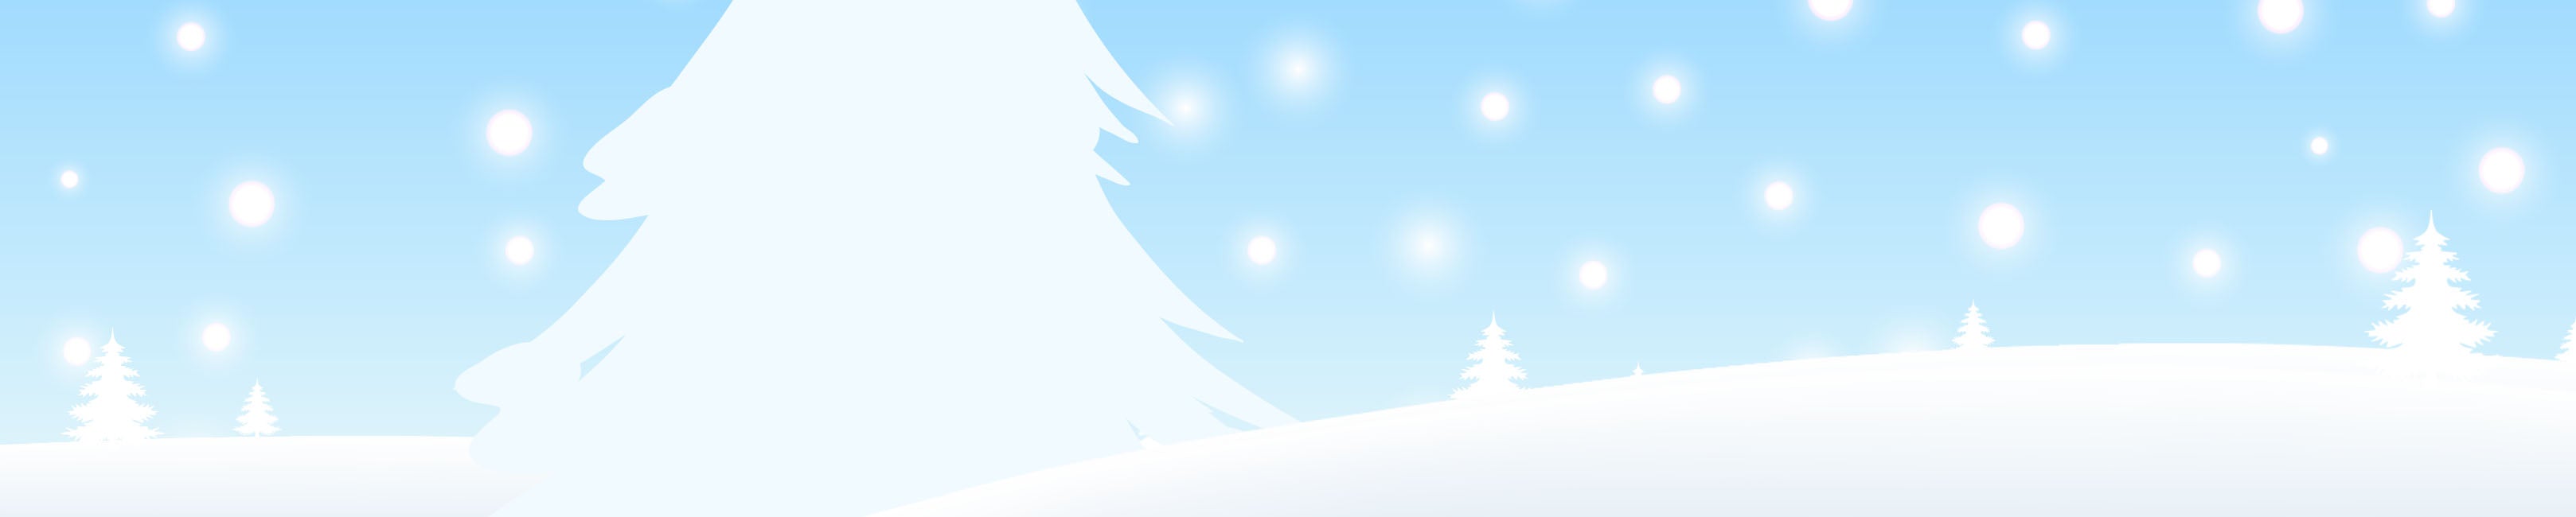 Christmas_PRomotional_PAge_Banner.jpg